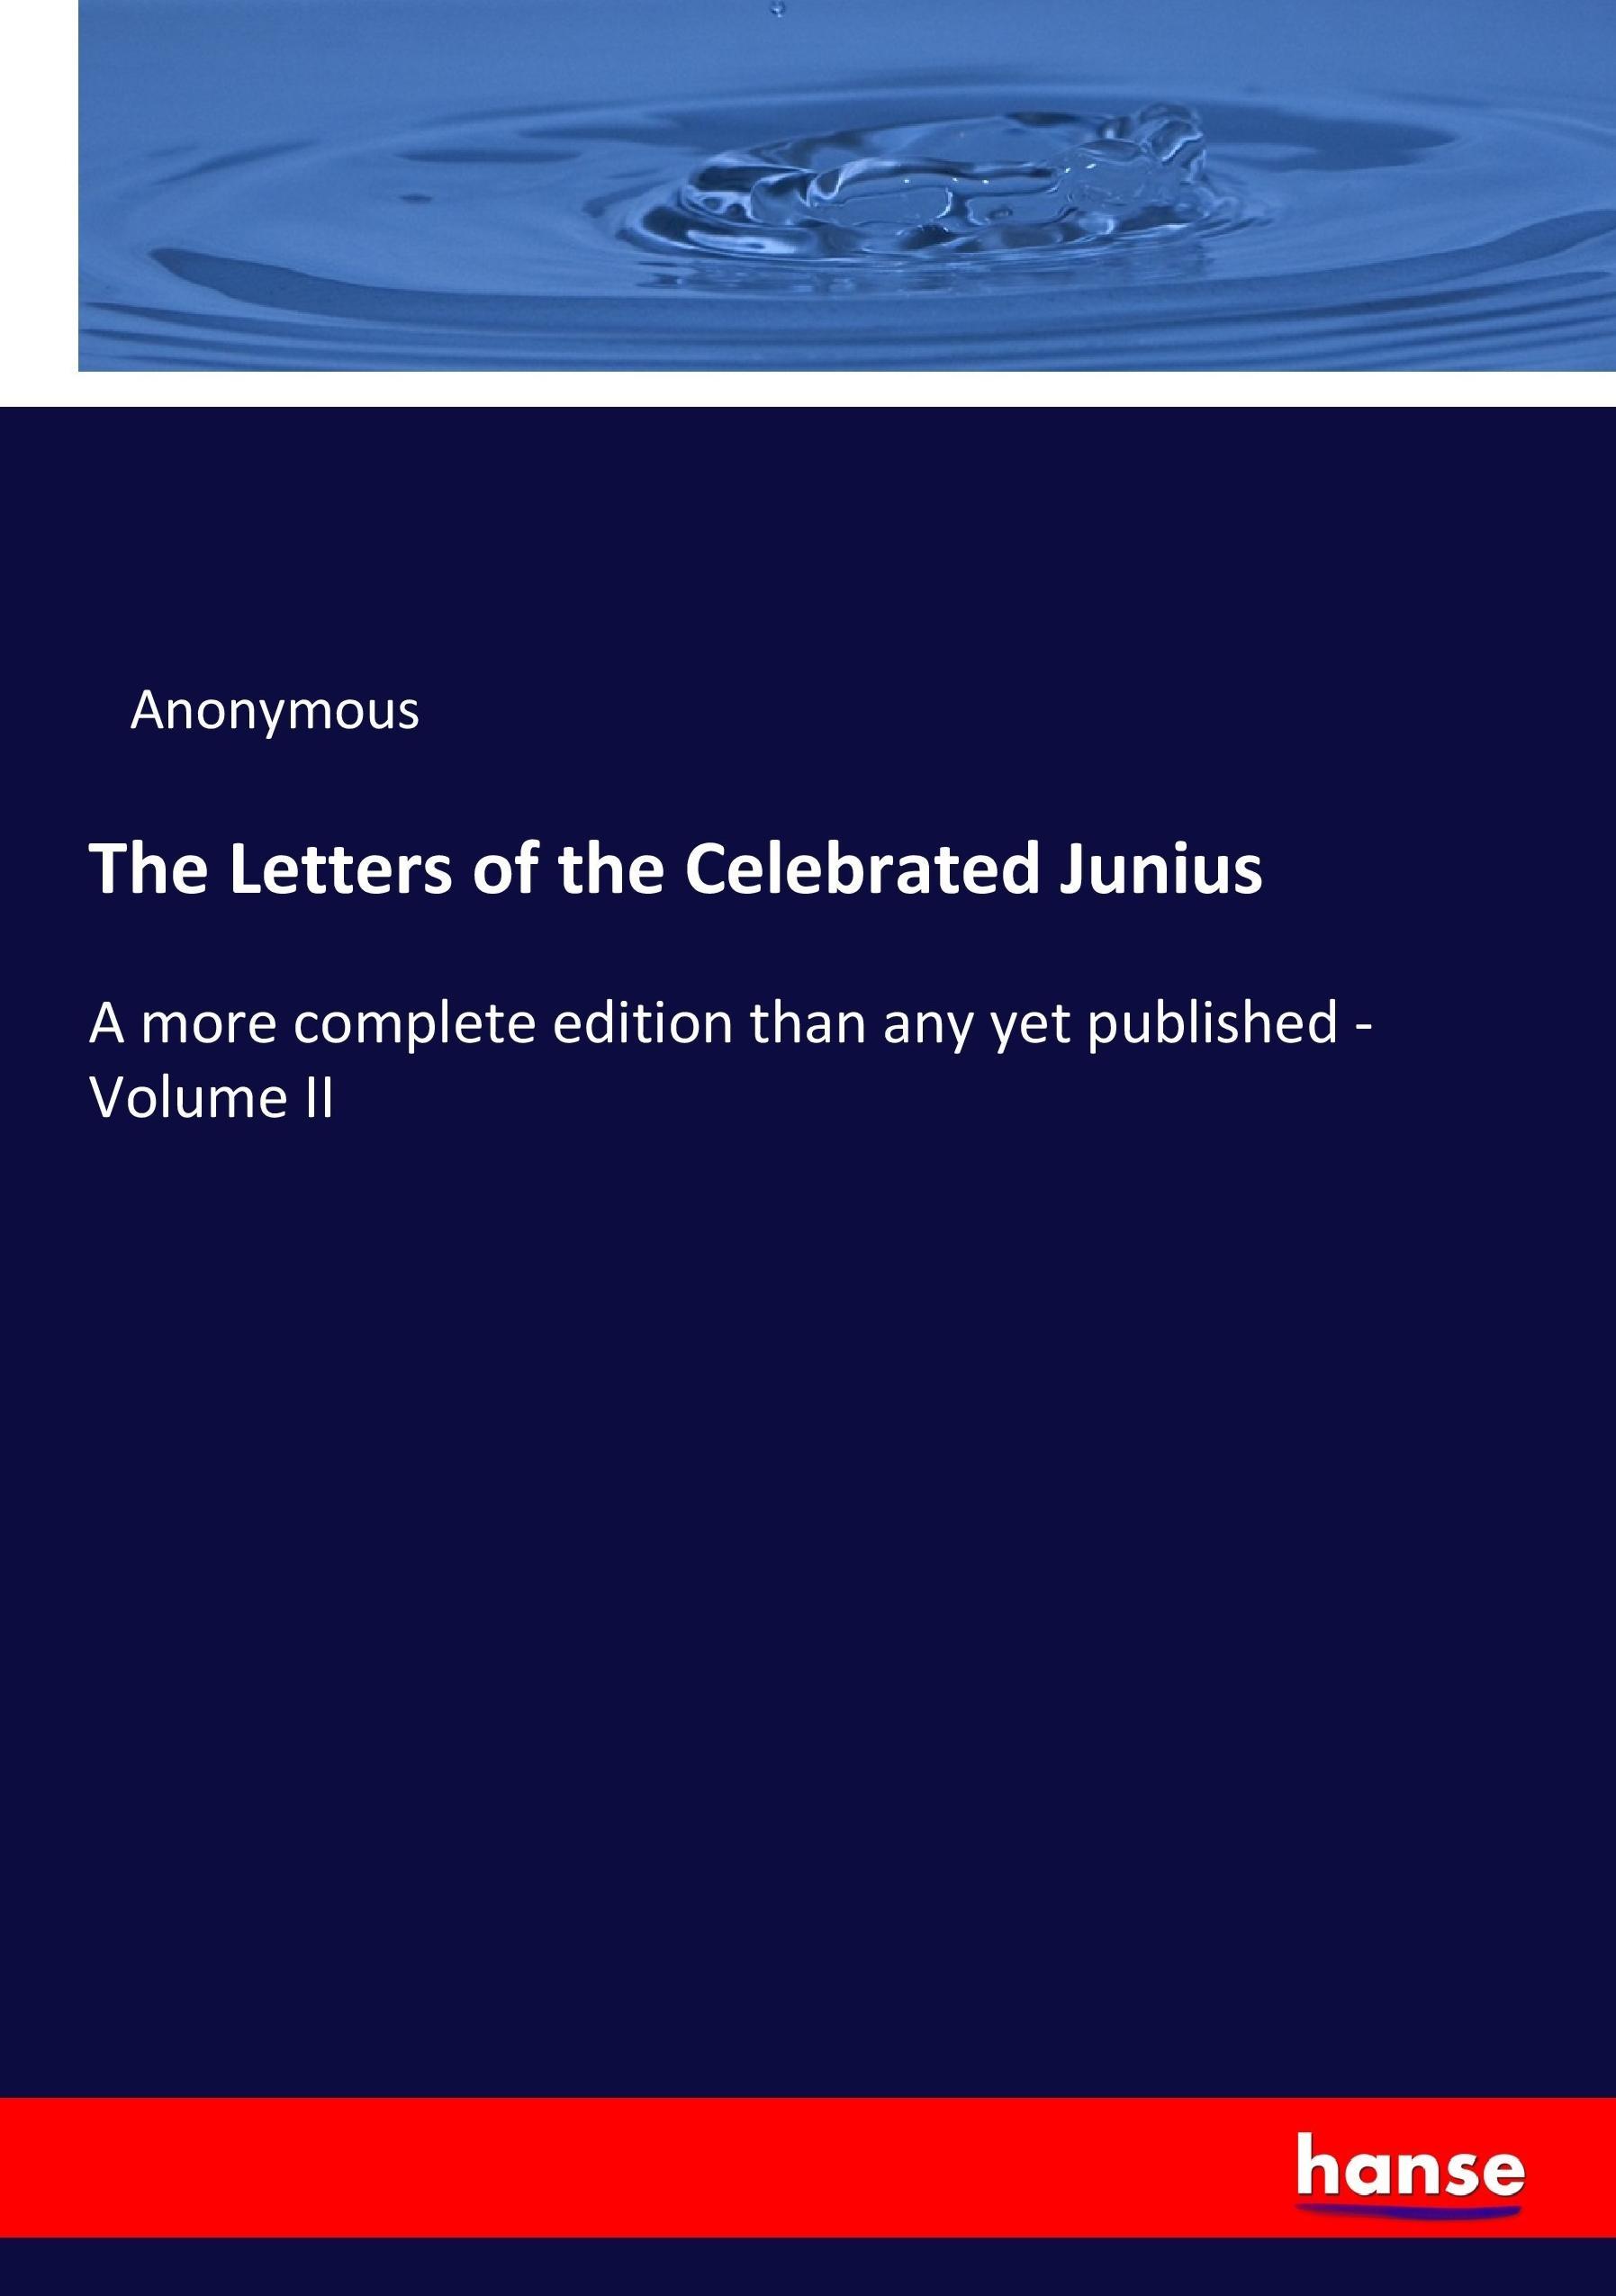 The Letters of the Celebrated Junius | A more complete edition than any yet published - Volume II | Anonymous | Taschenbuch | Paperback | 328 S. | Englisch | 2017 | hansebooks | EAN 9783337017385 - Anonymous